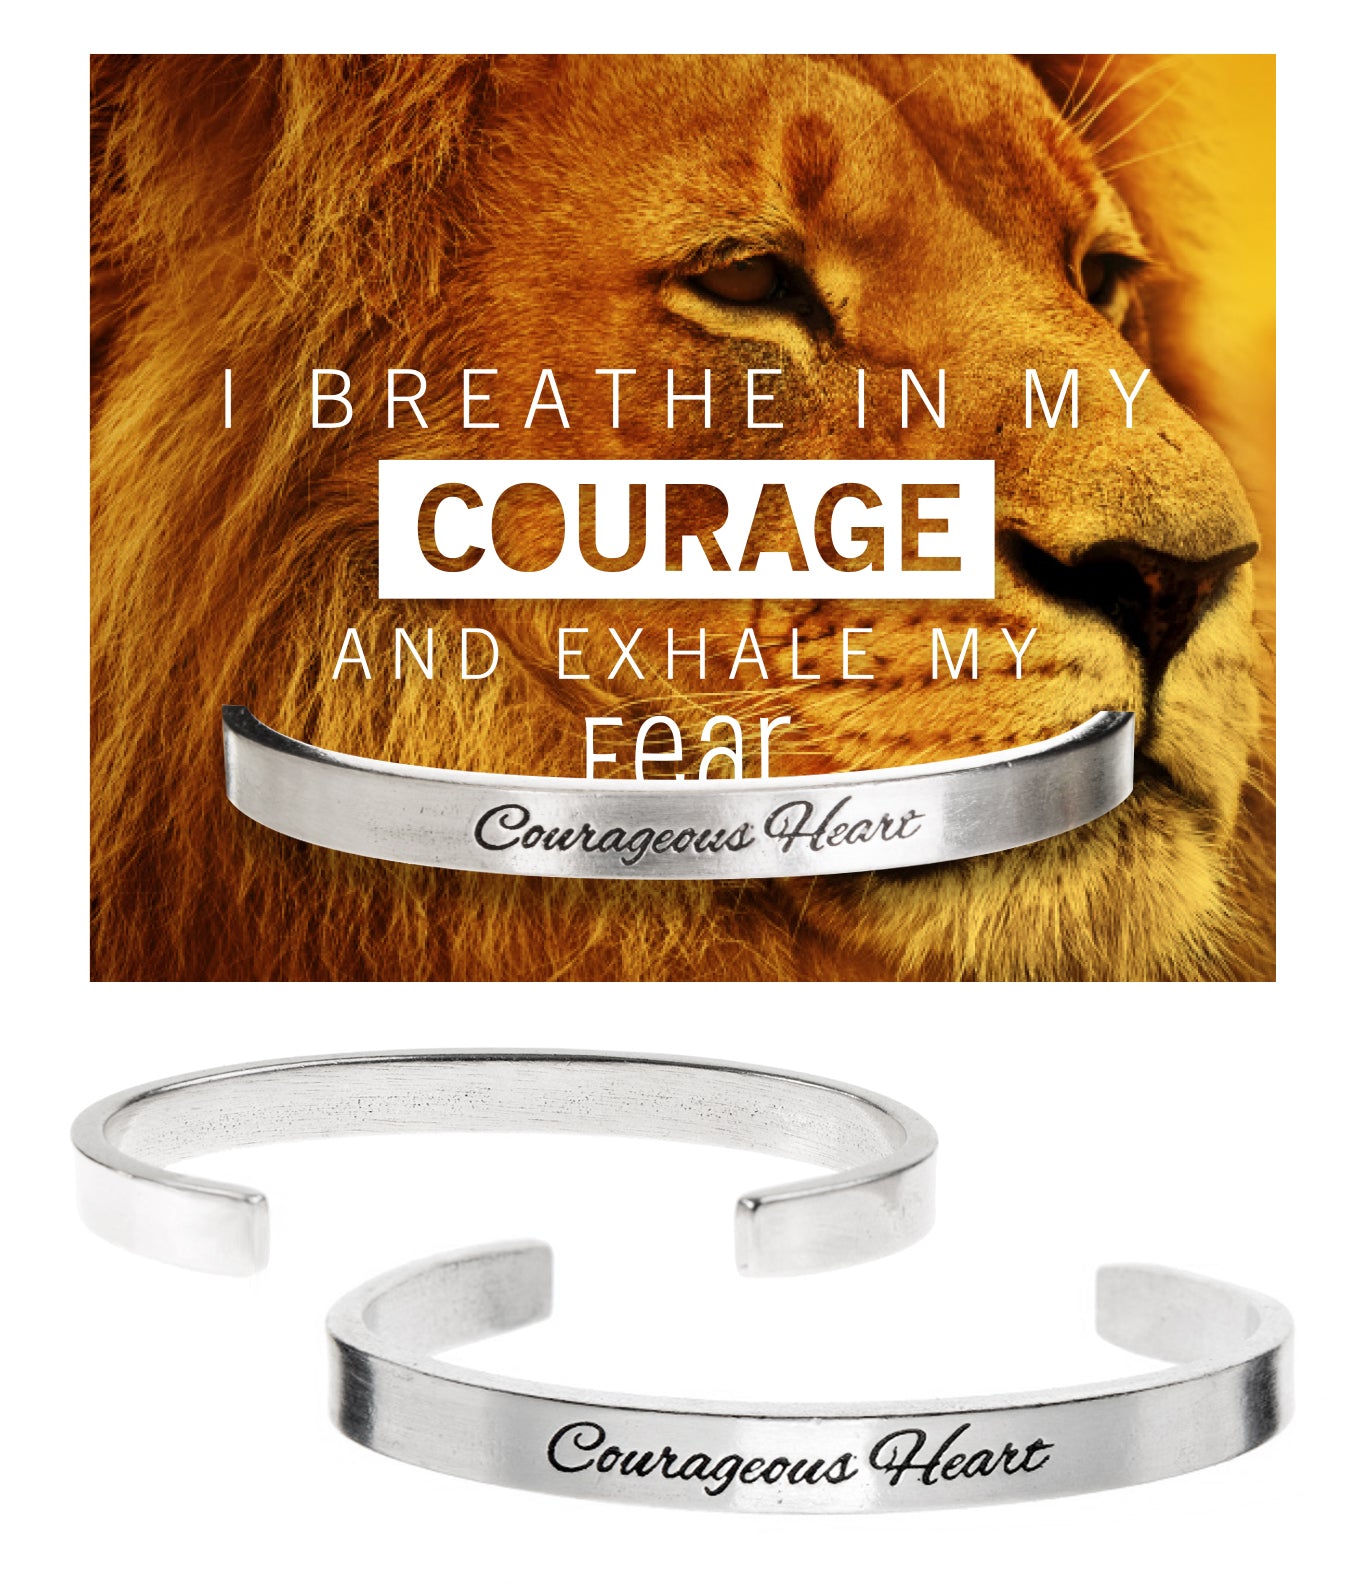 Courageous Heart Quotable Cuff Bracelet with backer card